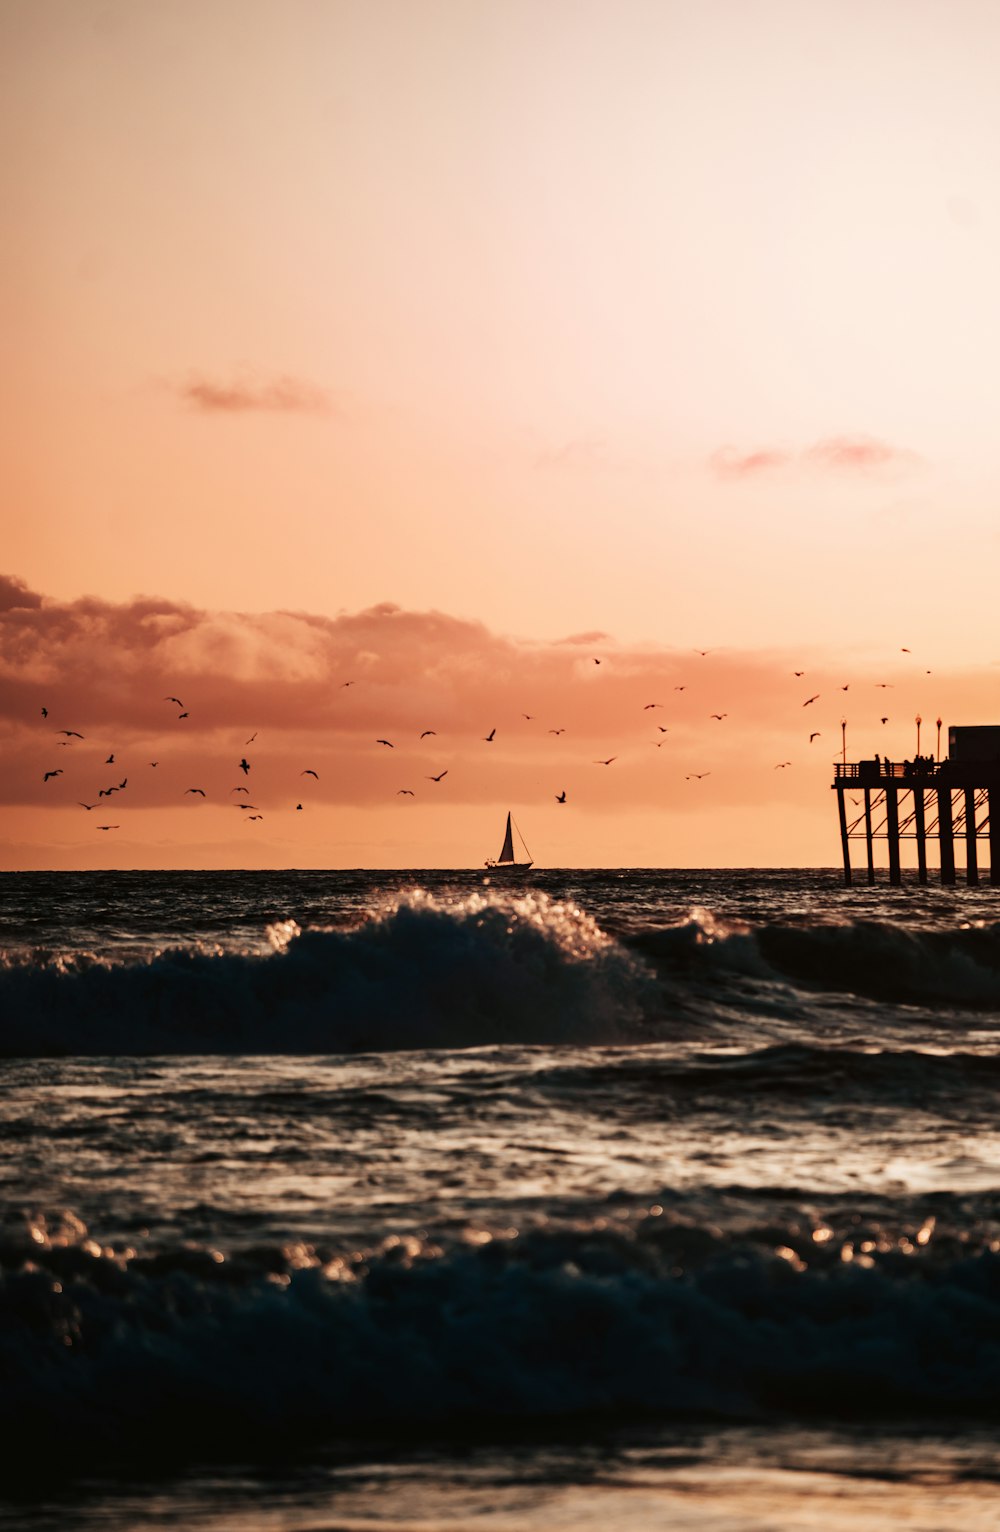 birds flying over a body of water with a pier in the background